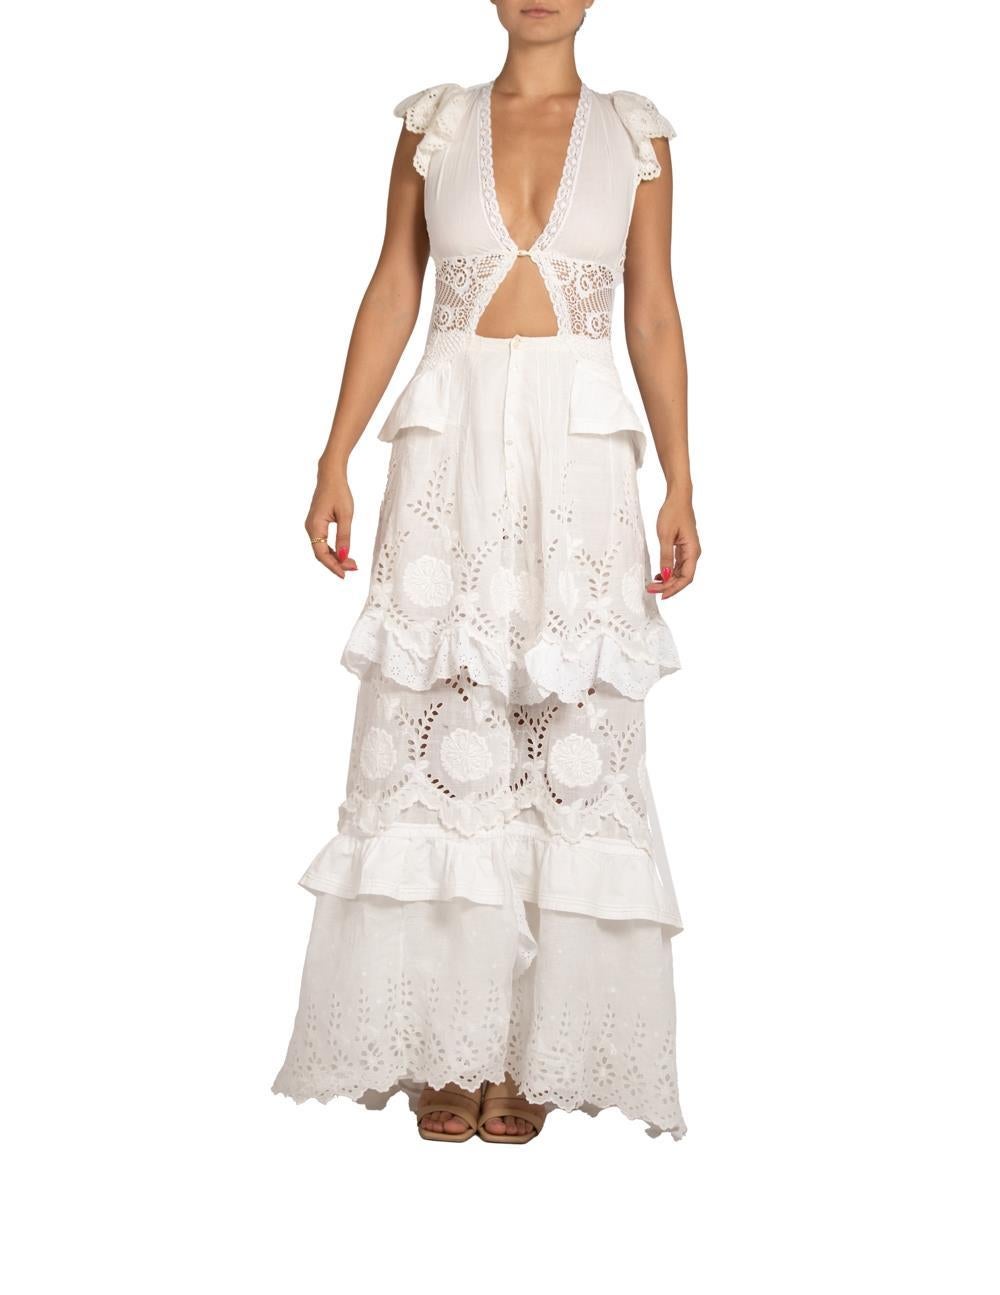 MORPHEW ATELIER White Handmade Lace  Gown In Excellent Condition For Sale In New York, NY